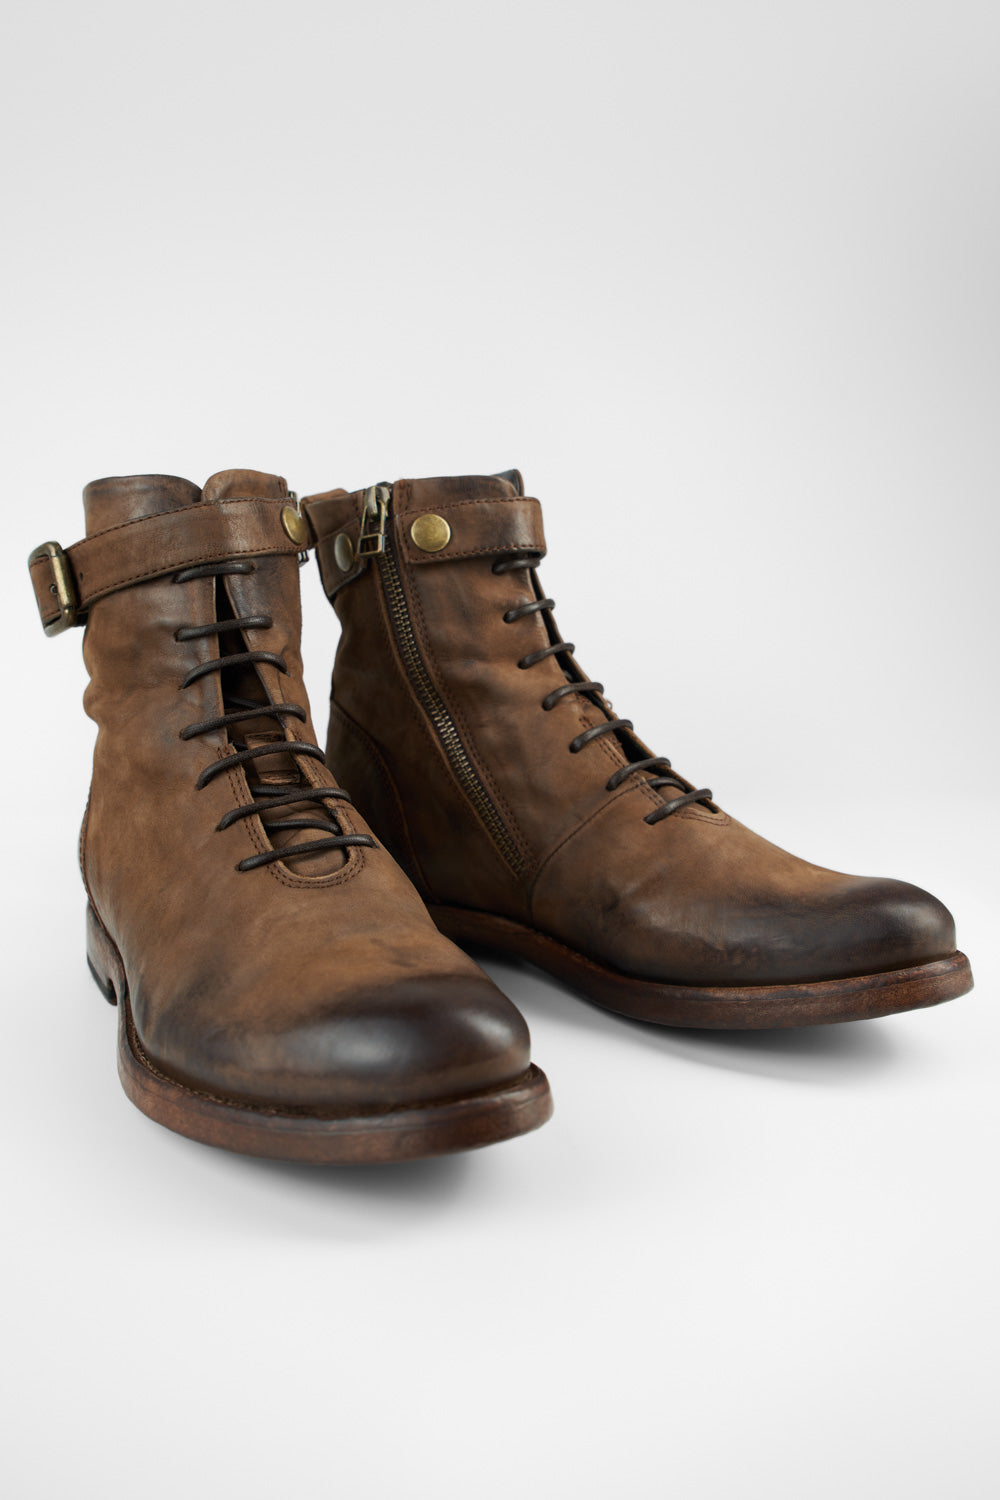 SLOANE chocolate lace-up boots.